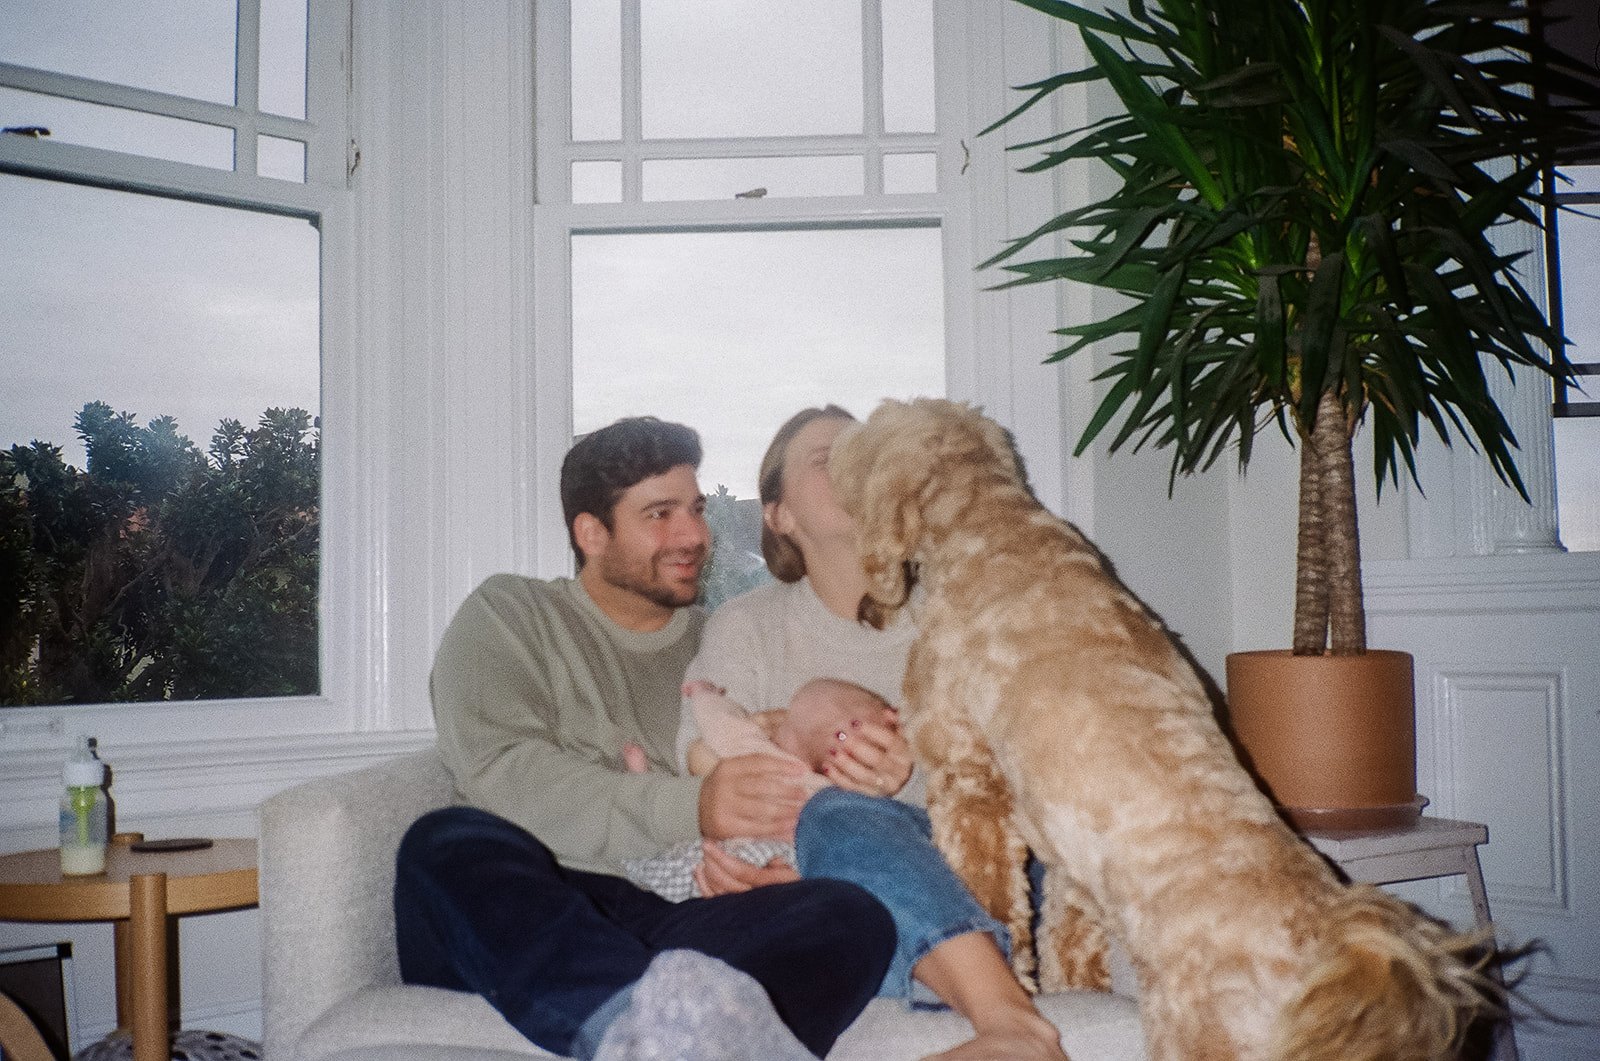 Family of three and their dog captured on 35mm film